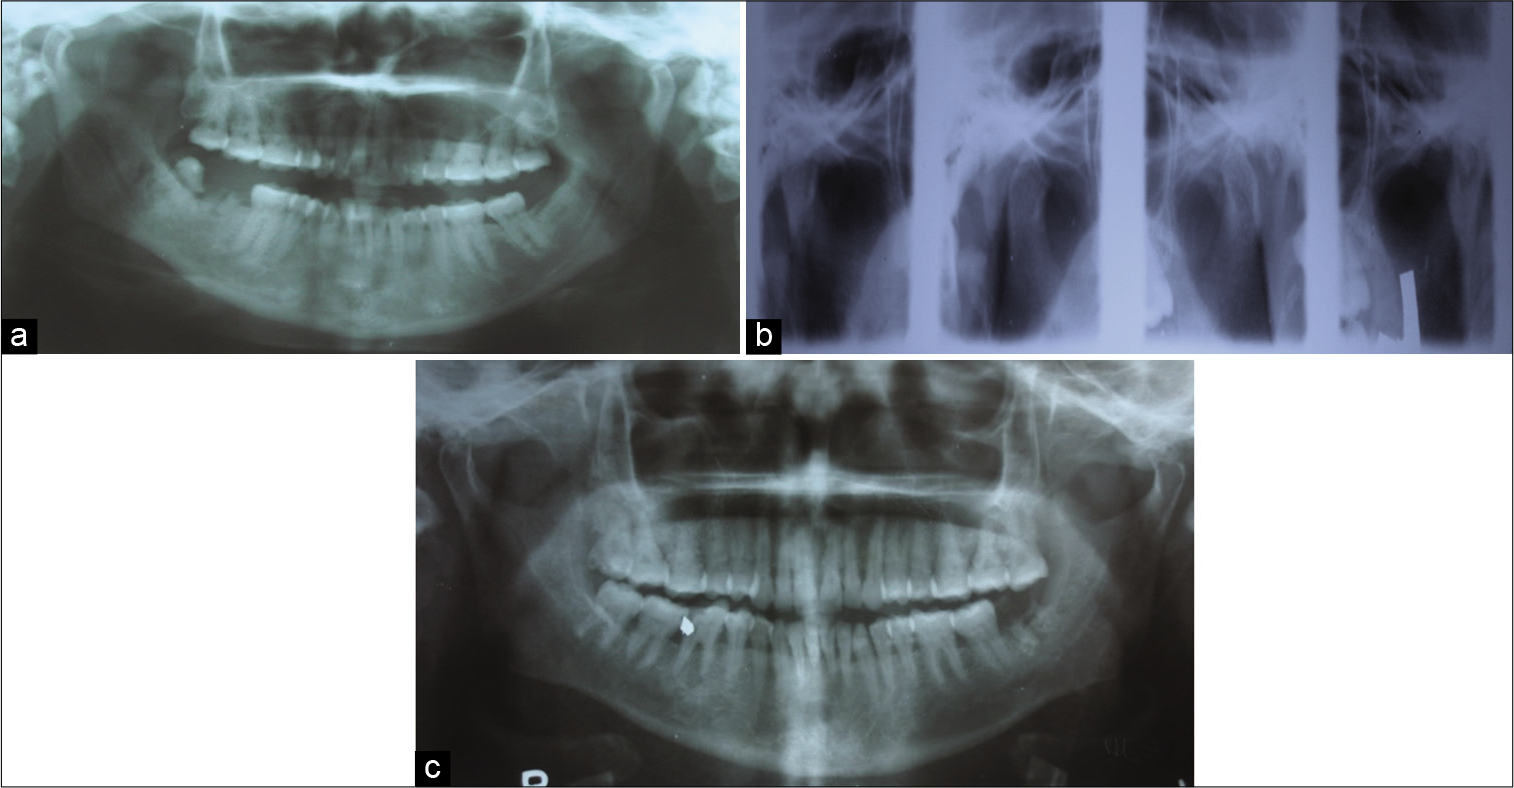 (a) Panoramic view shows bilaterally flat shaped of condyles with Eichner Class A (e.g., Figure 1a and 2a). (b) Double temporomandibular joint view showing flat-shaped condyles (e.g., Figure 2a). (c) Panoramic view shows bilaterally flat-shaped condyles with Eichner Class A (e.g., Figure 1a and 2a).